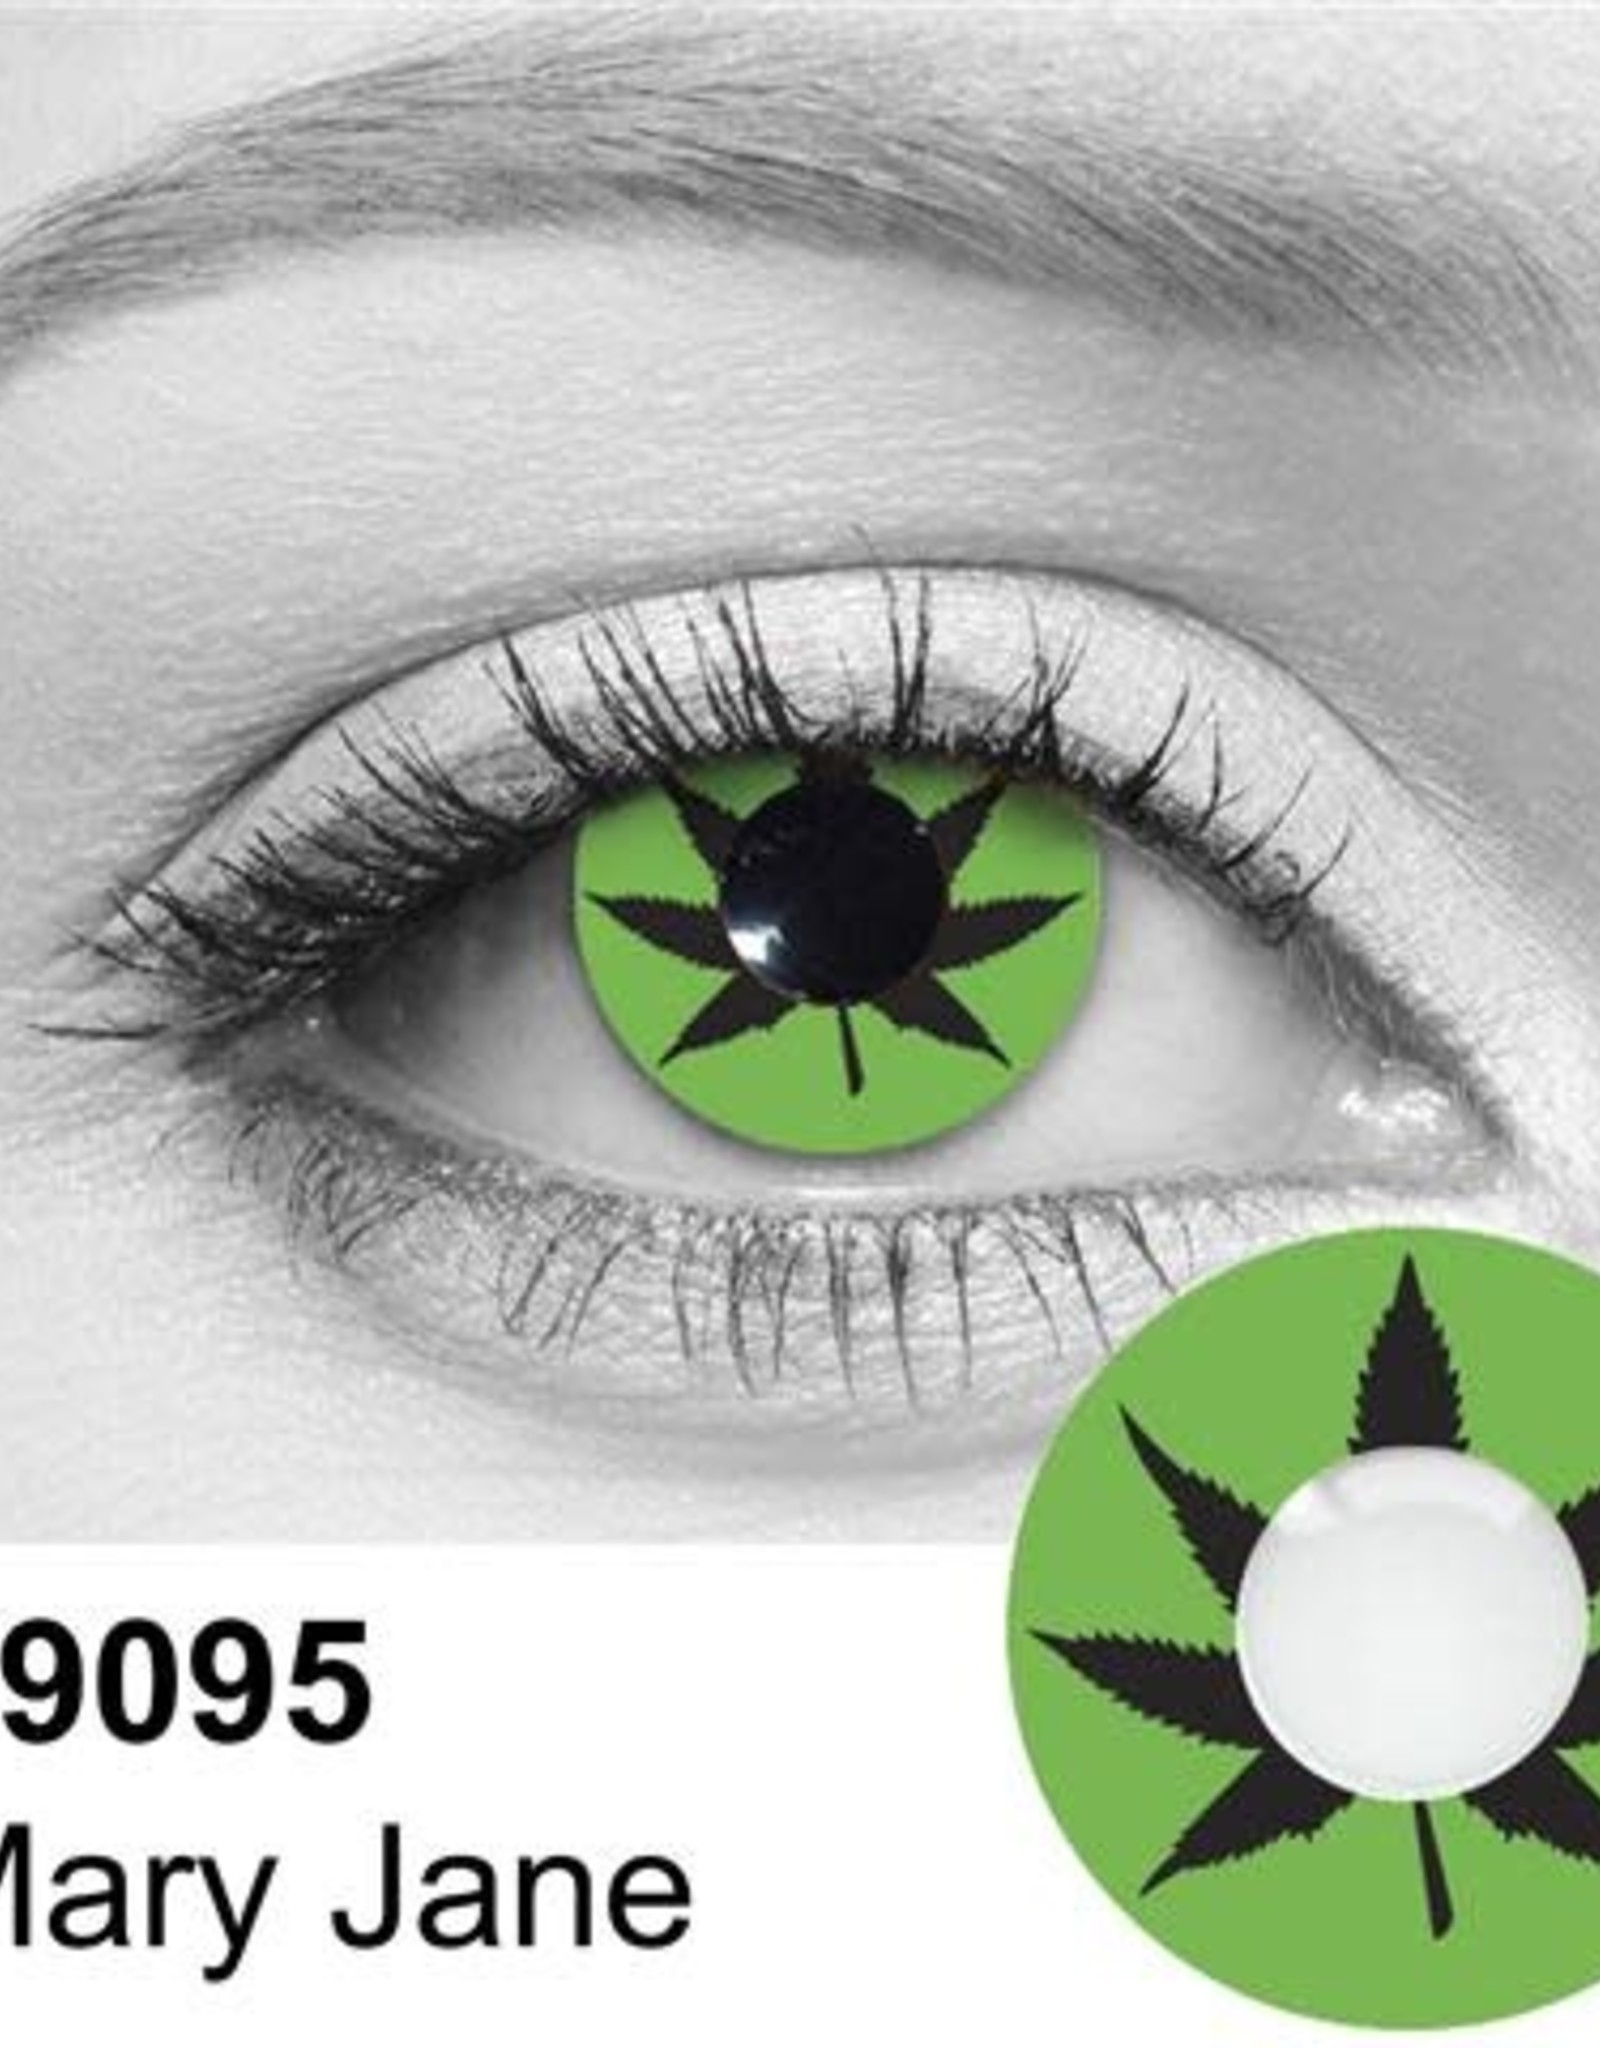 Mary Jane Contact Lenses